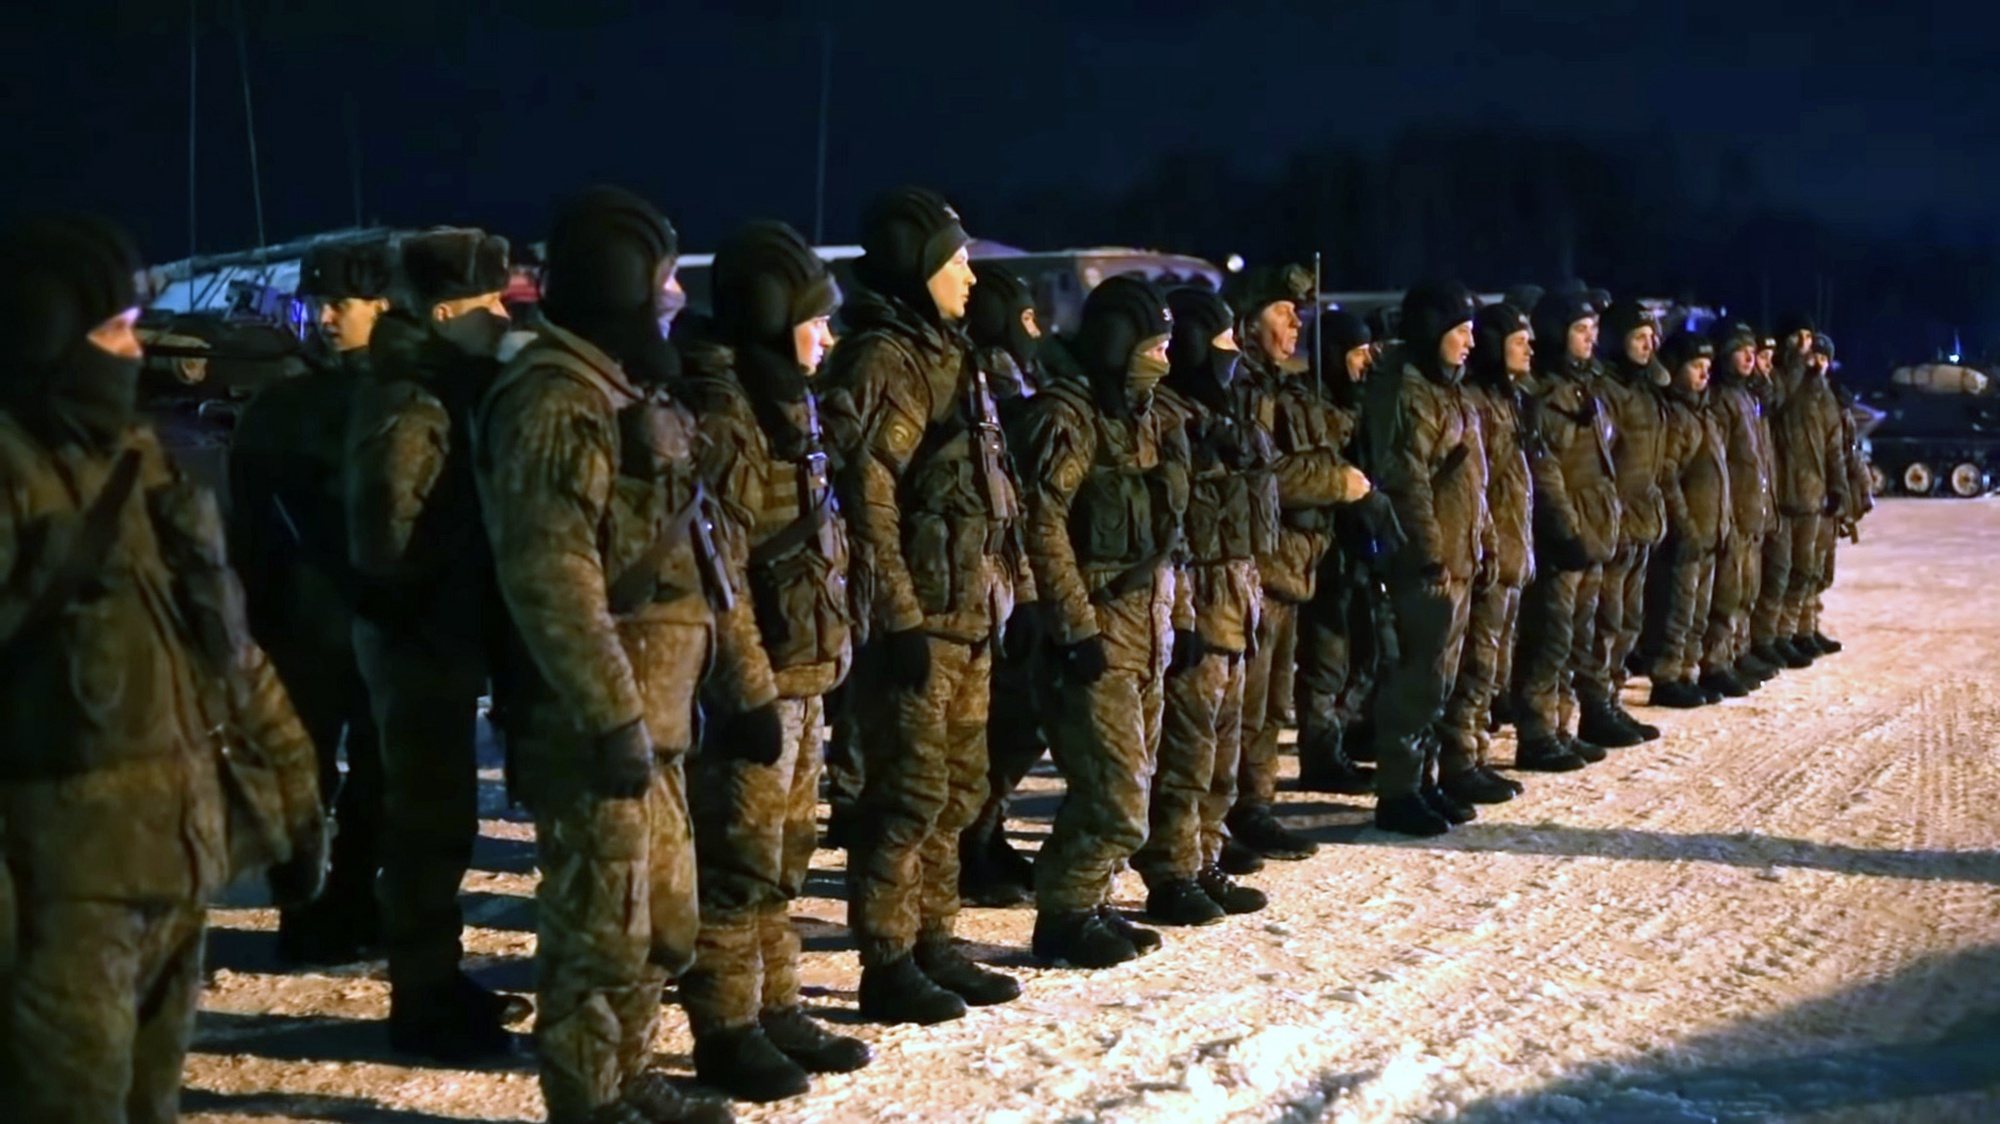 epa09672893 A handout still image taken from handout video made available by the Russian Defence Ministry press service shows Russian peacekeepers prior to boarding a military flight on their way to take part in a &#039;CSTO peacekeeping operation&#039; in Kazakhstan, at Ivanovo-North airport in the Ivanovo region, Russia, 08 January 2022. In accordance with the decision of the CSTO Collective Security Council adopted on 06 January 2022, the collective peacekeeping forces of the Collective Security Treaty Organization (CSTO)Â have been sent &#039;for a limited time to stabilize and normalize the situation to Kazakhstan&#039; at the request of the Kazakh president. They include units of the Armed Forces of Russia, Belarus, Armenia, Tajikistan and Kyrgyzstan. The Russian Ministry of Defence announced on 08 January that the tranfer of the Russian contingent of the CSTO peacekeeping forces to Kazakhstan&#039;sÂ &#039;Almaty&#039; and &#039;Zhitygen&#039; airfields continued by military transport aircraft from Russia&#039;s airfields in the Moscow, Ivanovo, and Ulyanovsk regions.  EPA/RUSSIAN DEFENCE MINISTRY PRESS S --  BEST QUALITY AVAILABLE -- HANDOUT EDITORIAL USE ONLY/NO SALES